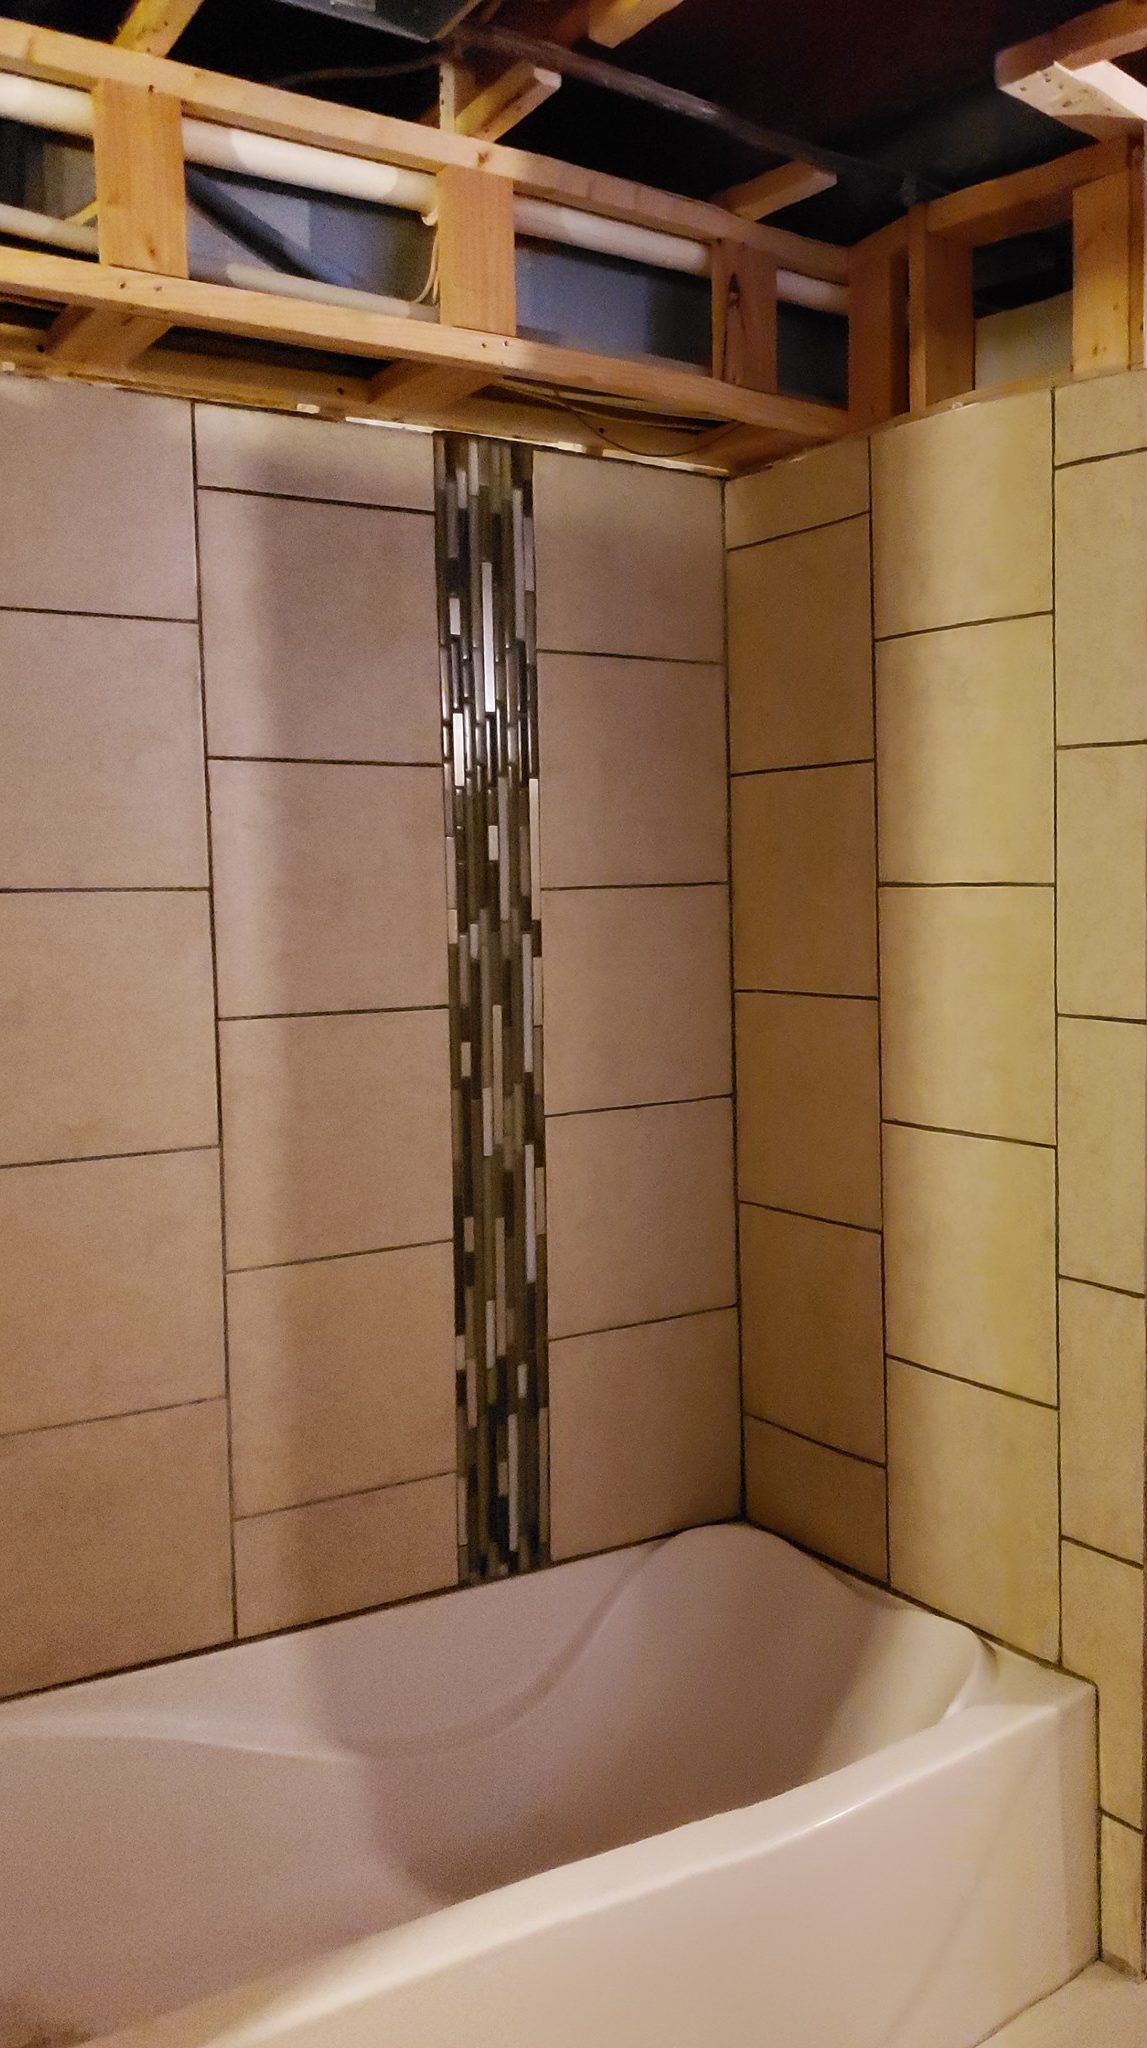 Tiled walls surround a bathtub in an otherwise unfinished basement.